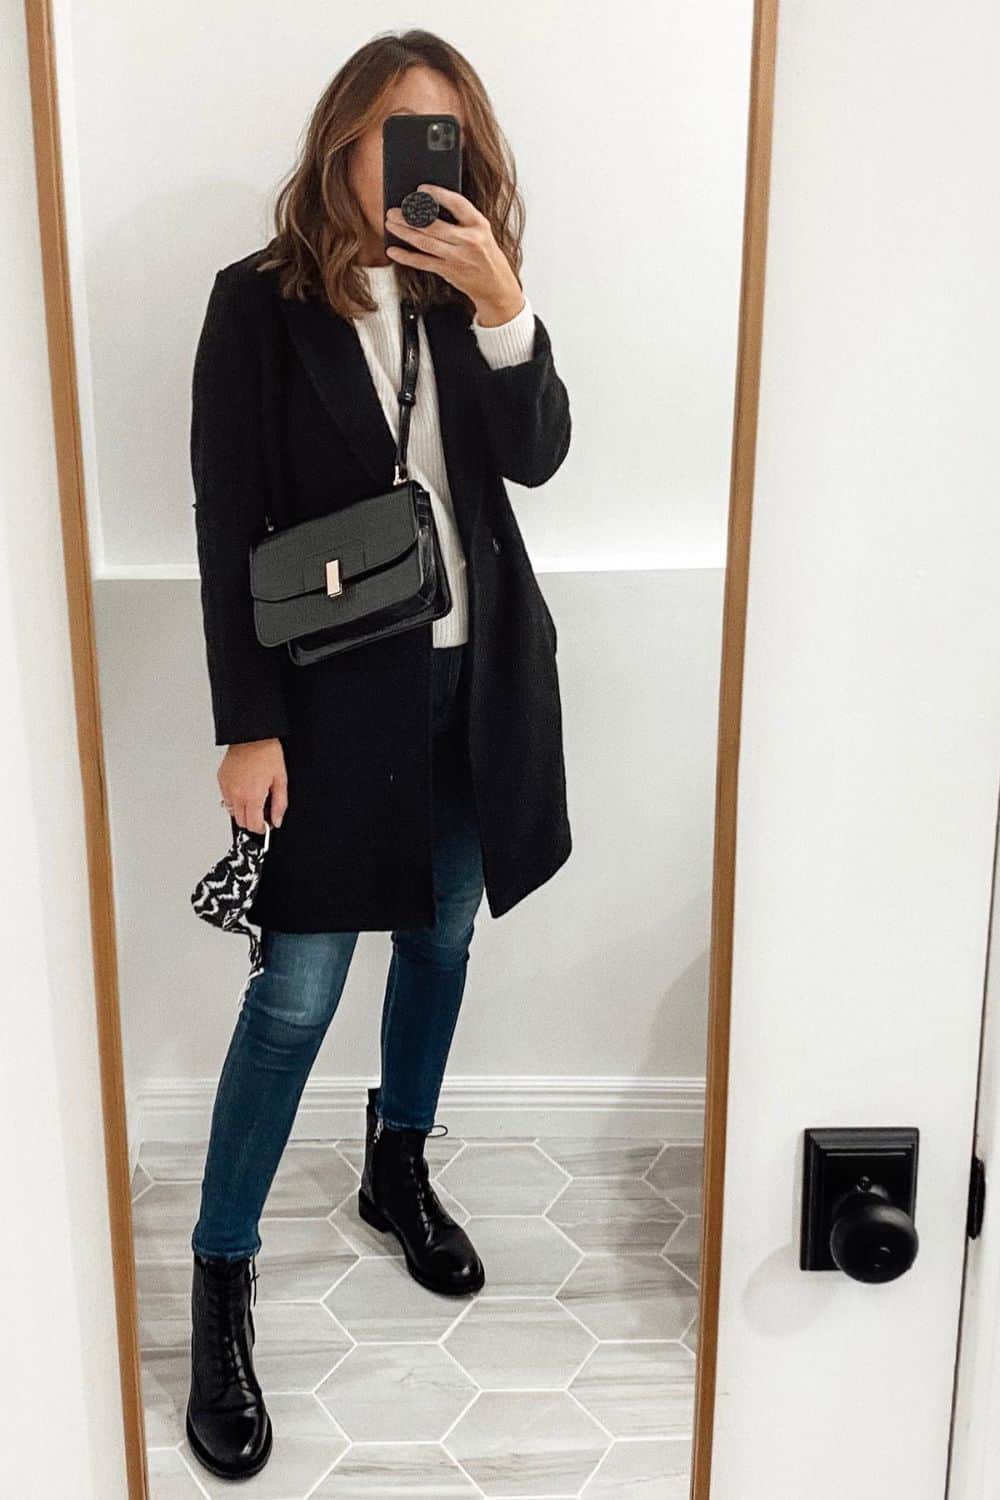 Combat Boots Outfit With Black Coat